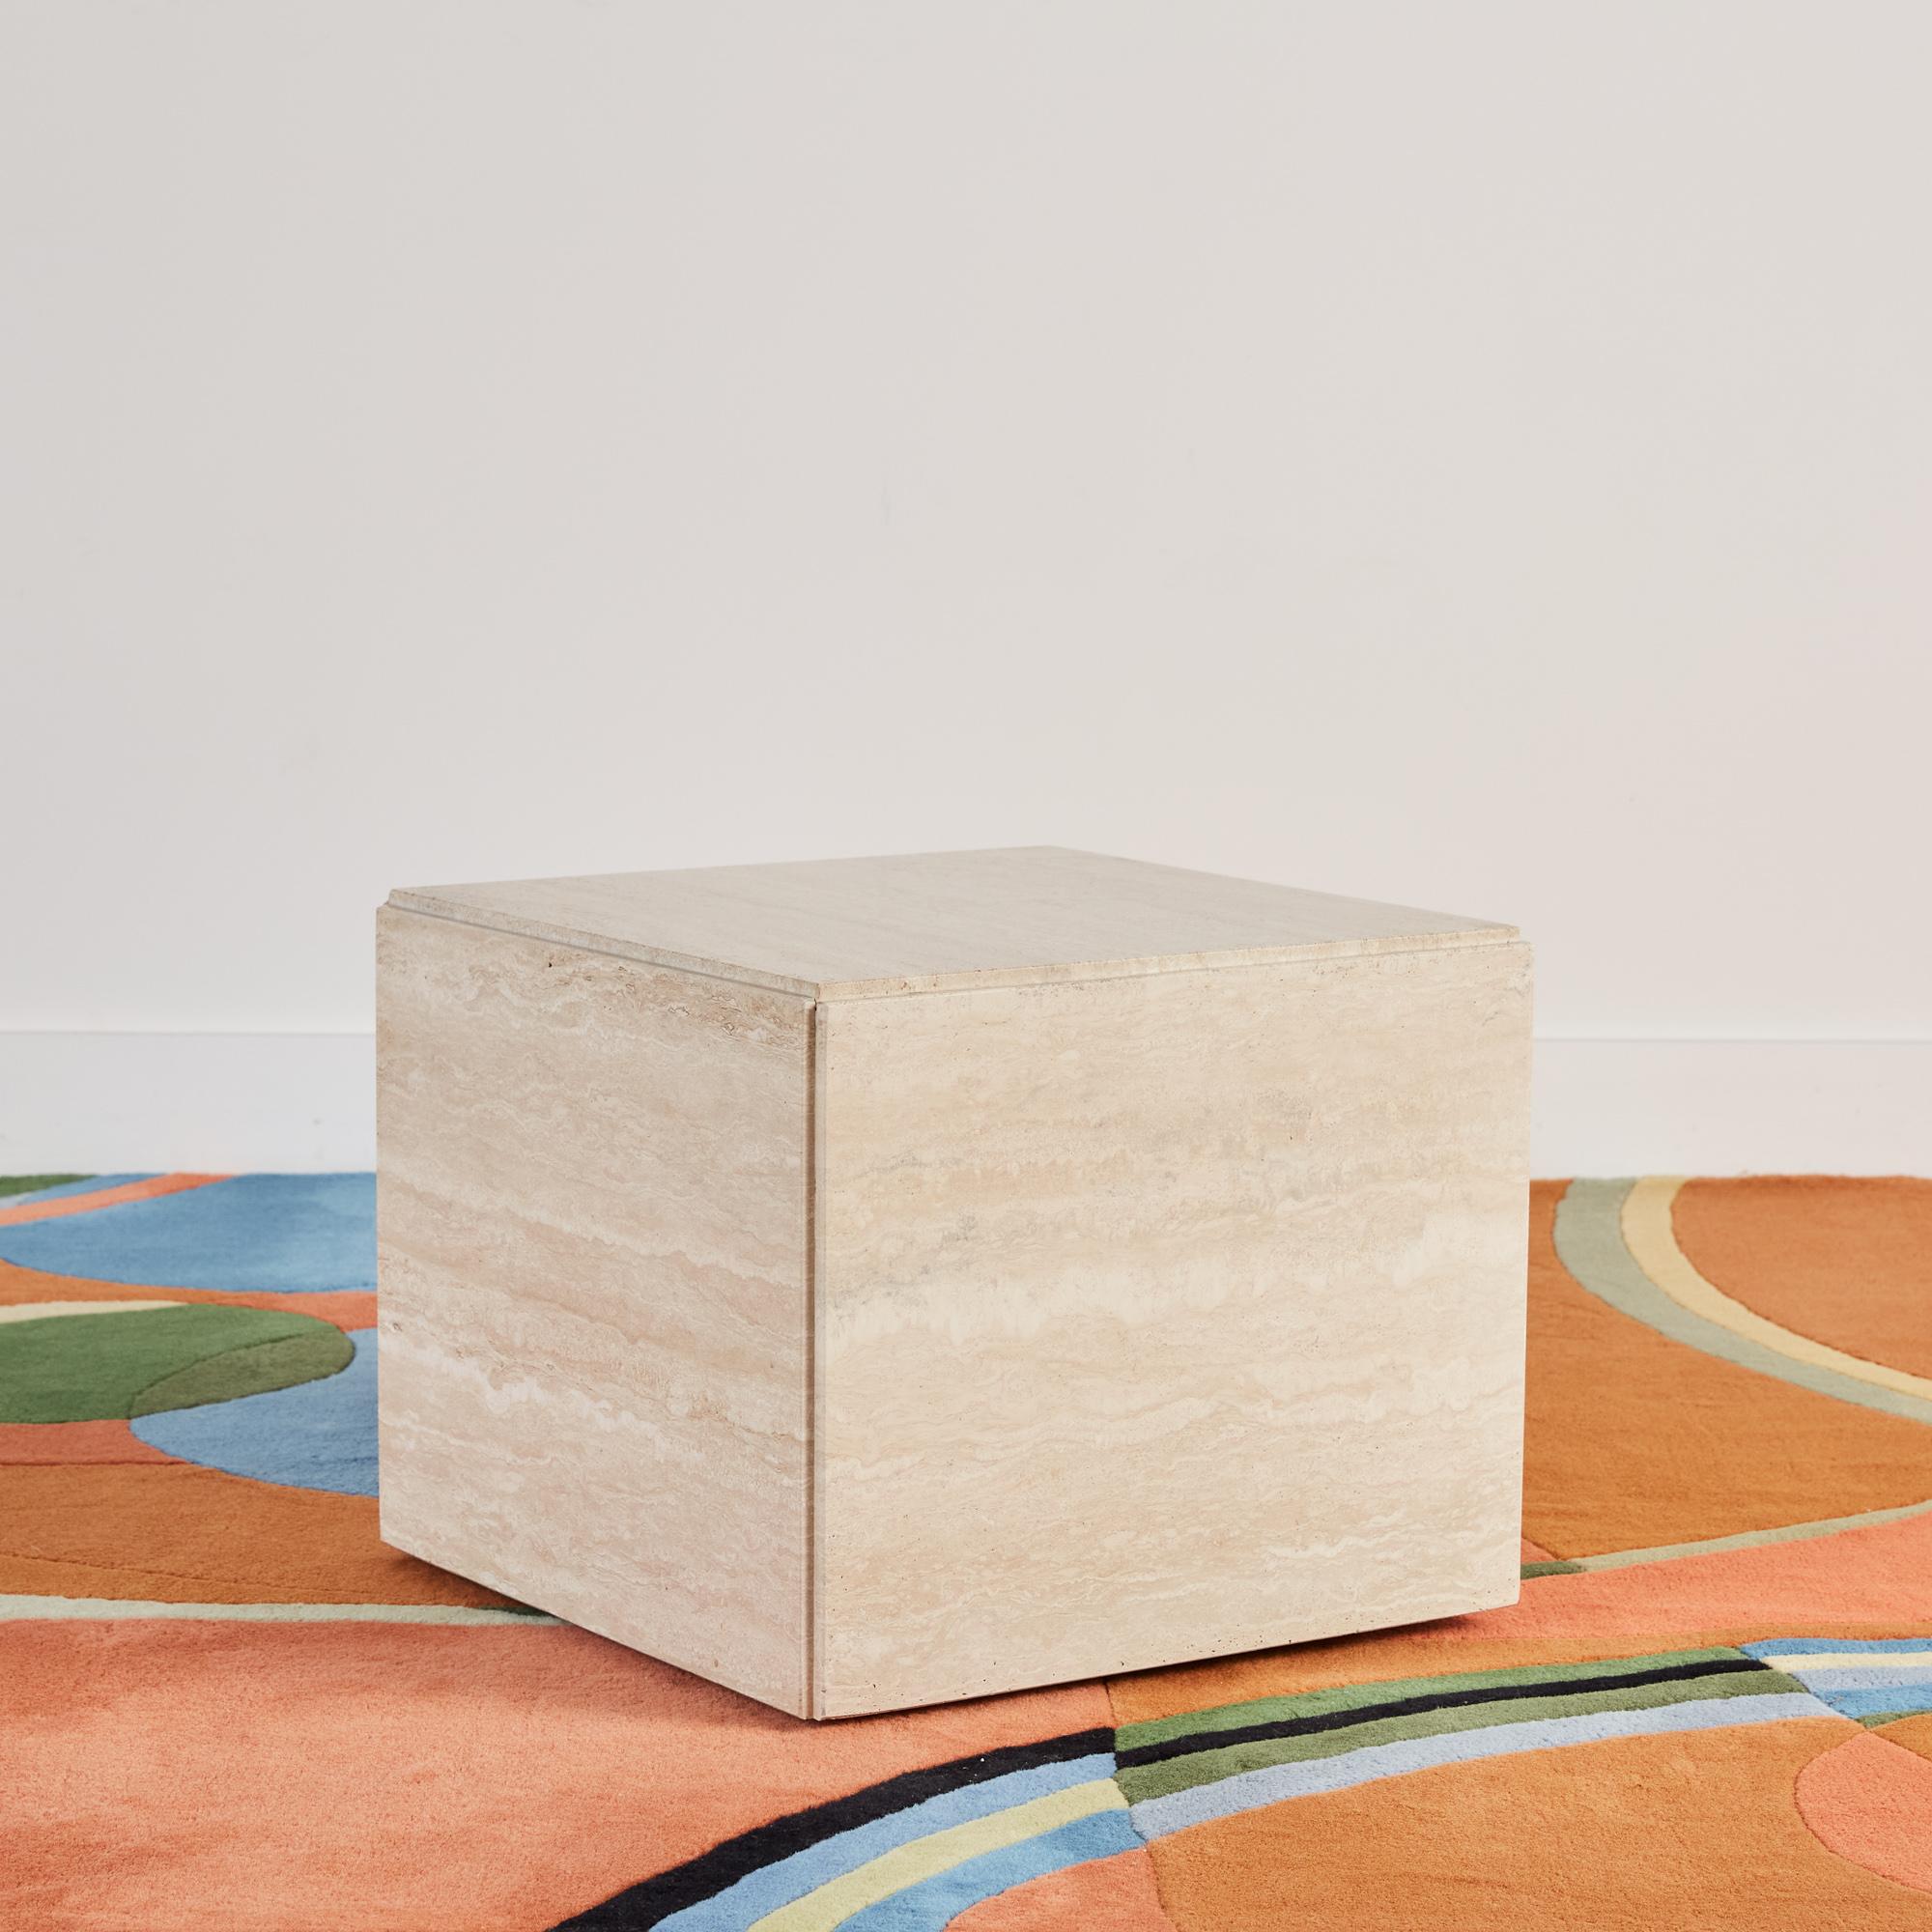 Postmodern travertine cube side table, Italy, c.1980s. This square table sits on casters for easy movability. With a sleek, Minimalist shape that is reminiscent of tables designed by Italian legends Mario Bellini and Angelo Mangiarotti, this